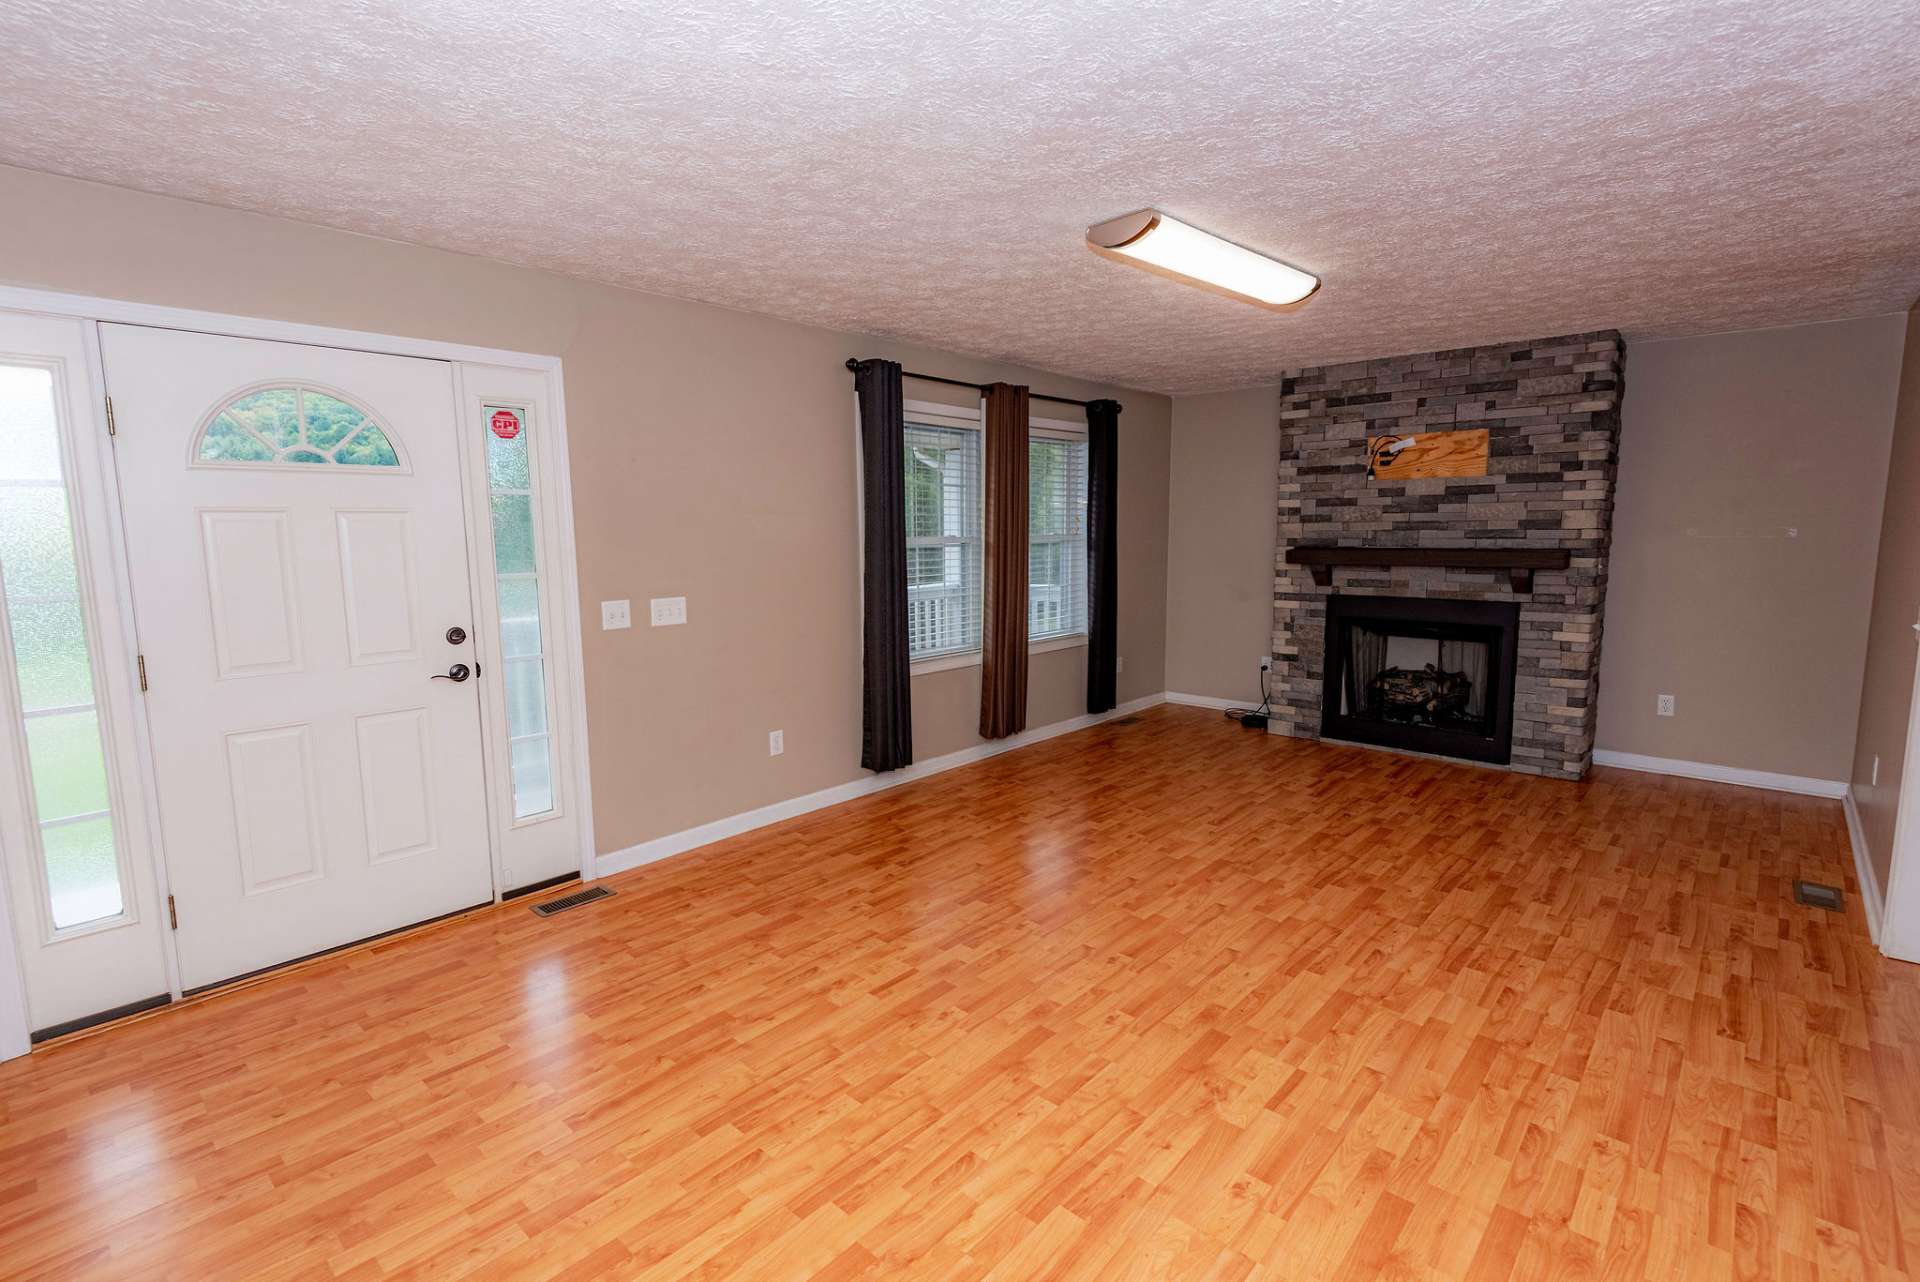 Walk in the front door to the living room with a gas log fireplace.